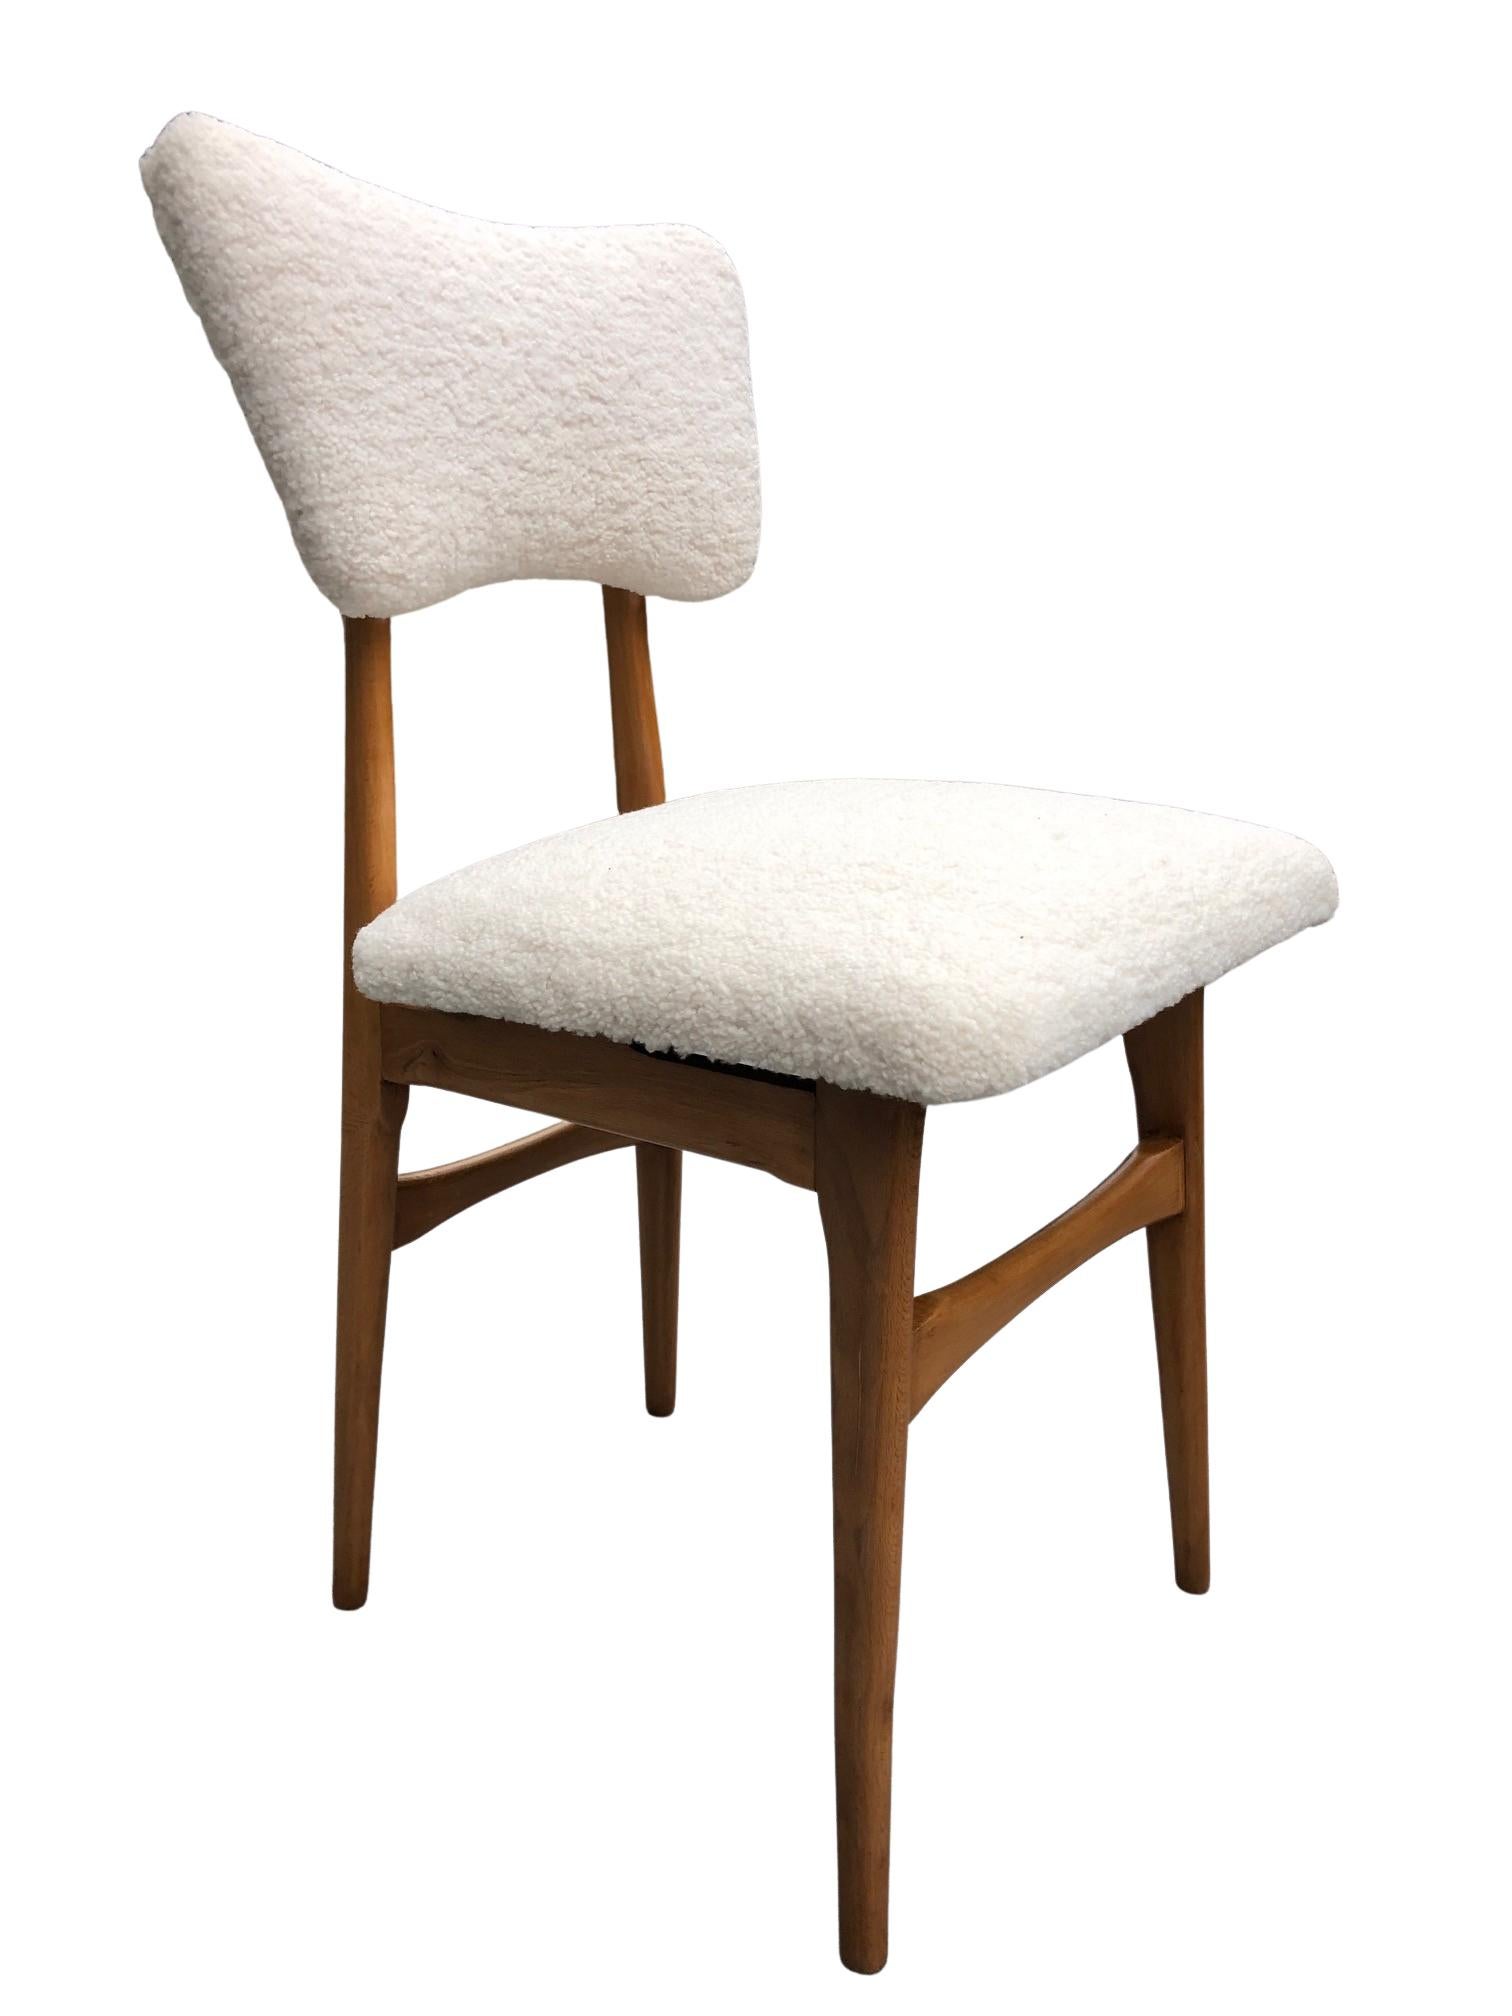 Midcentury Cream Bouclé and Wood Dining Chairs, Europe, 1960s, Set of Two For Sale 8